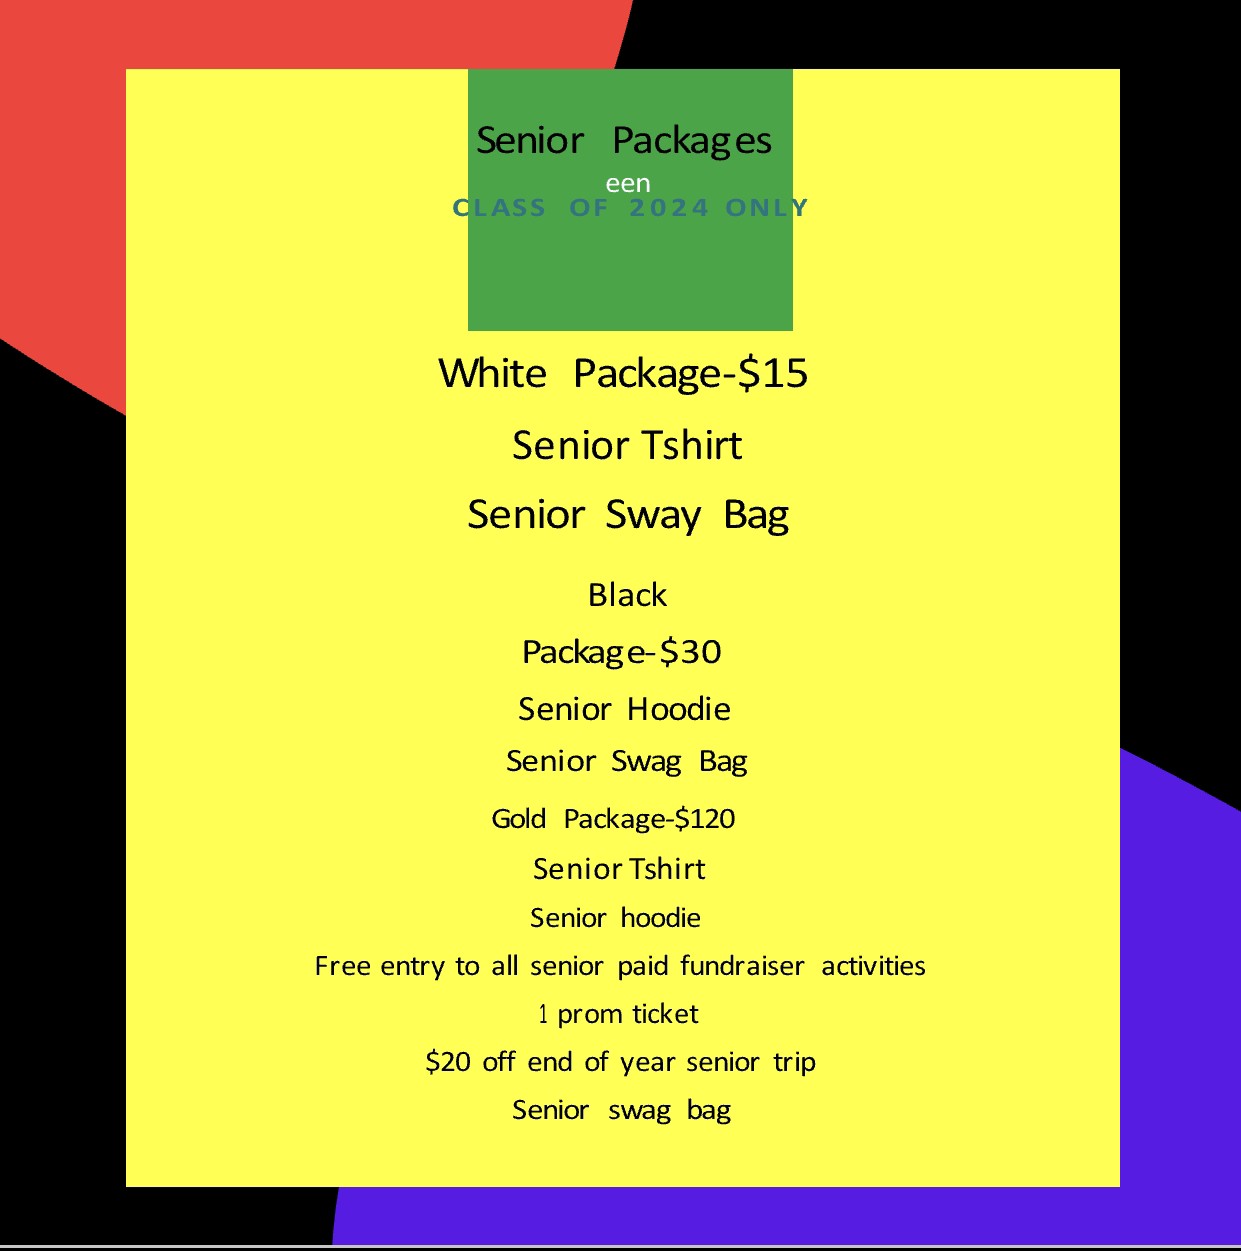 senior packages info (text describing packages on a yellow background) 